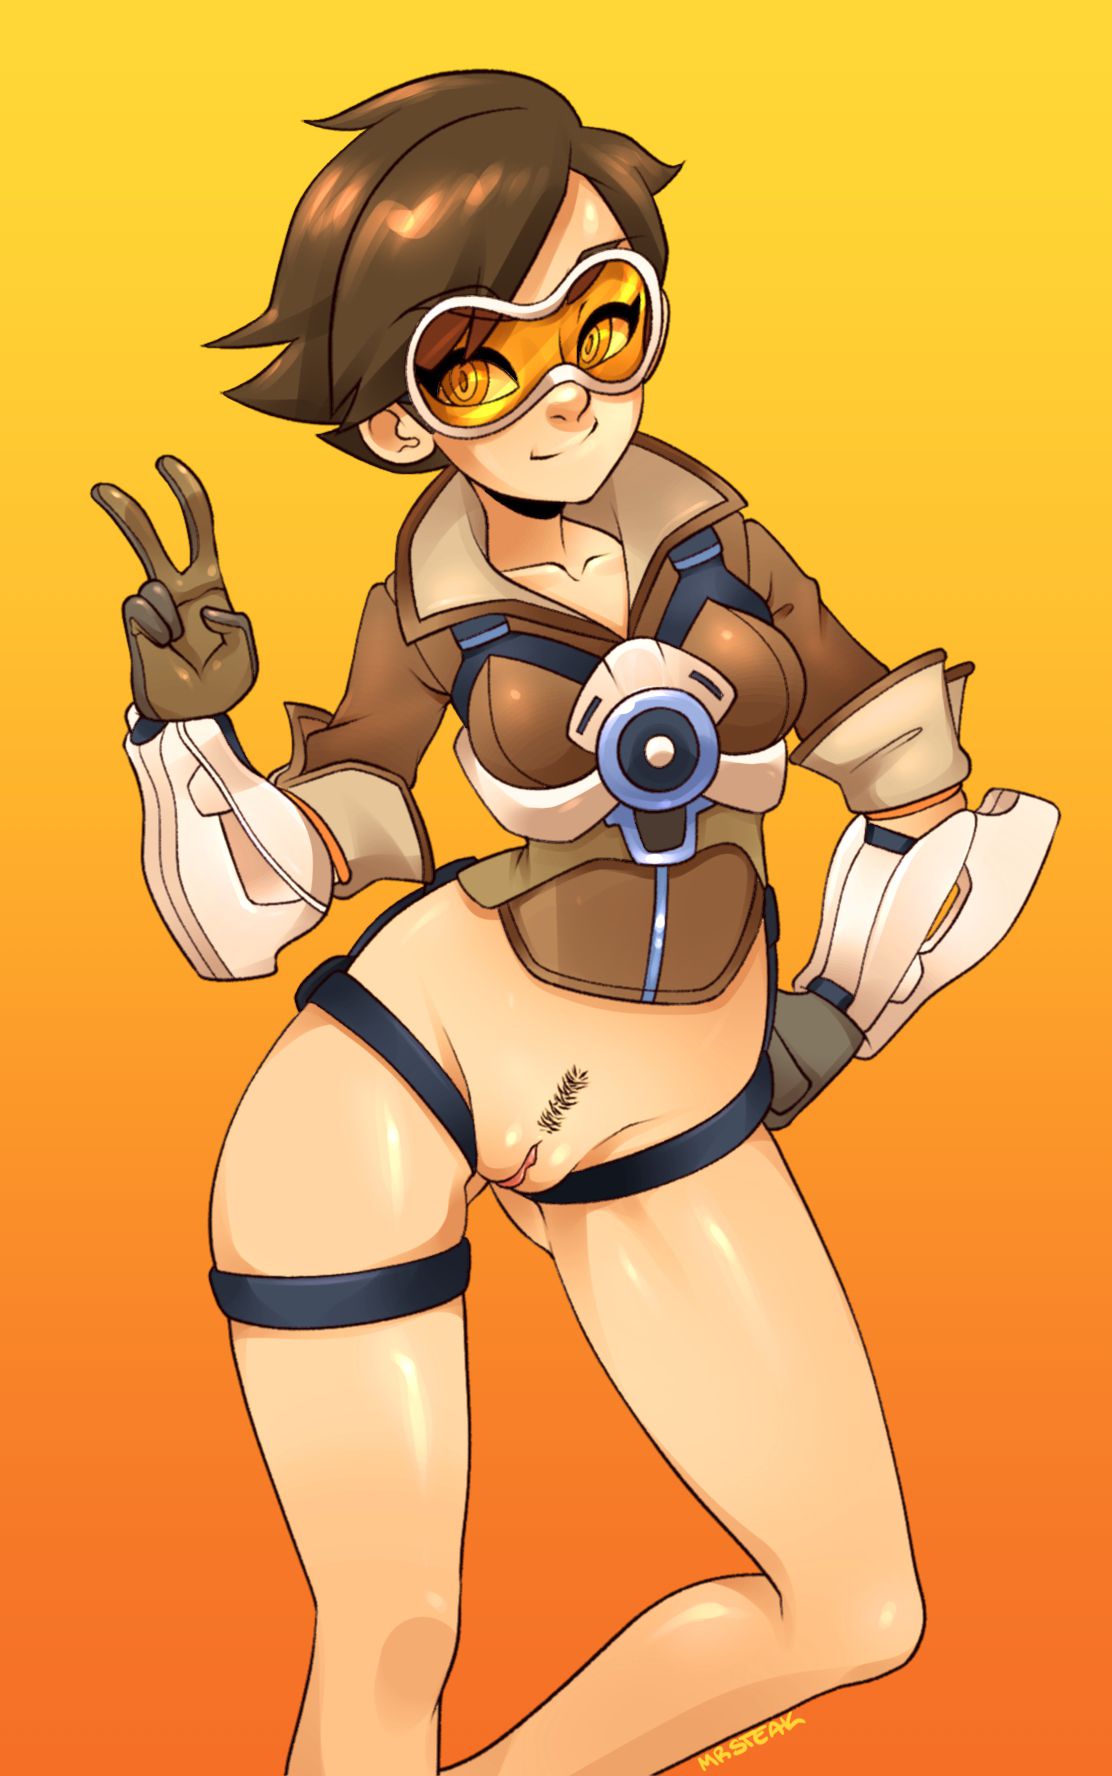 [Over-watch] Tracer photo gallery Wwww Part2 24